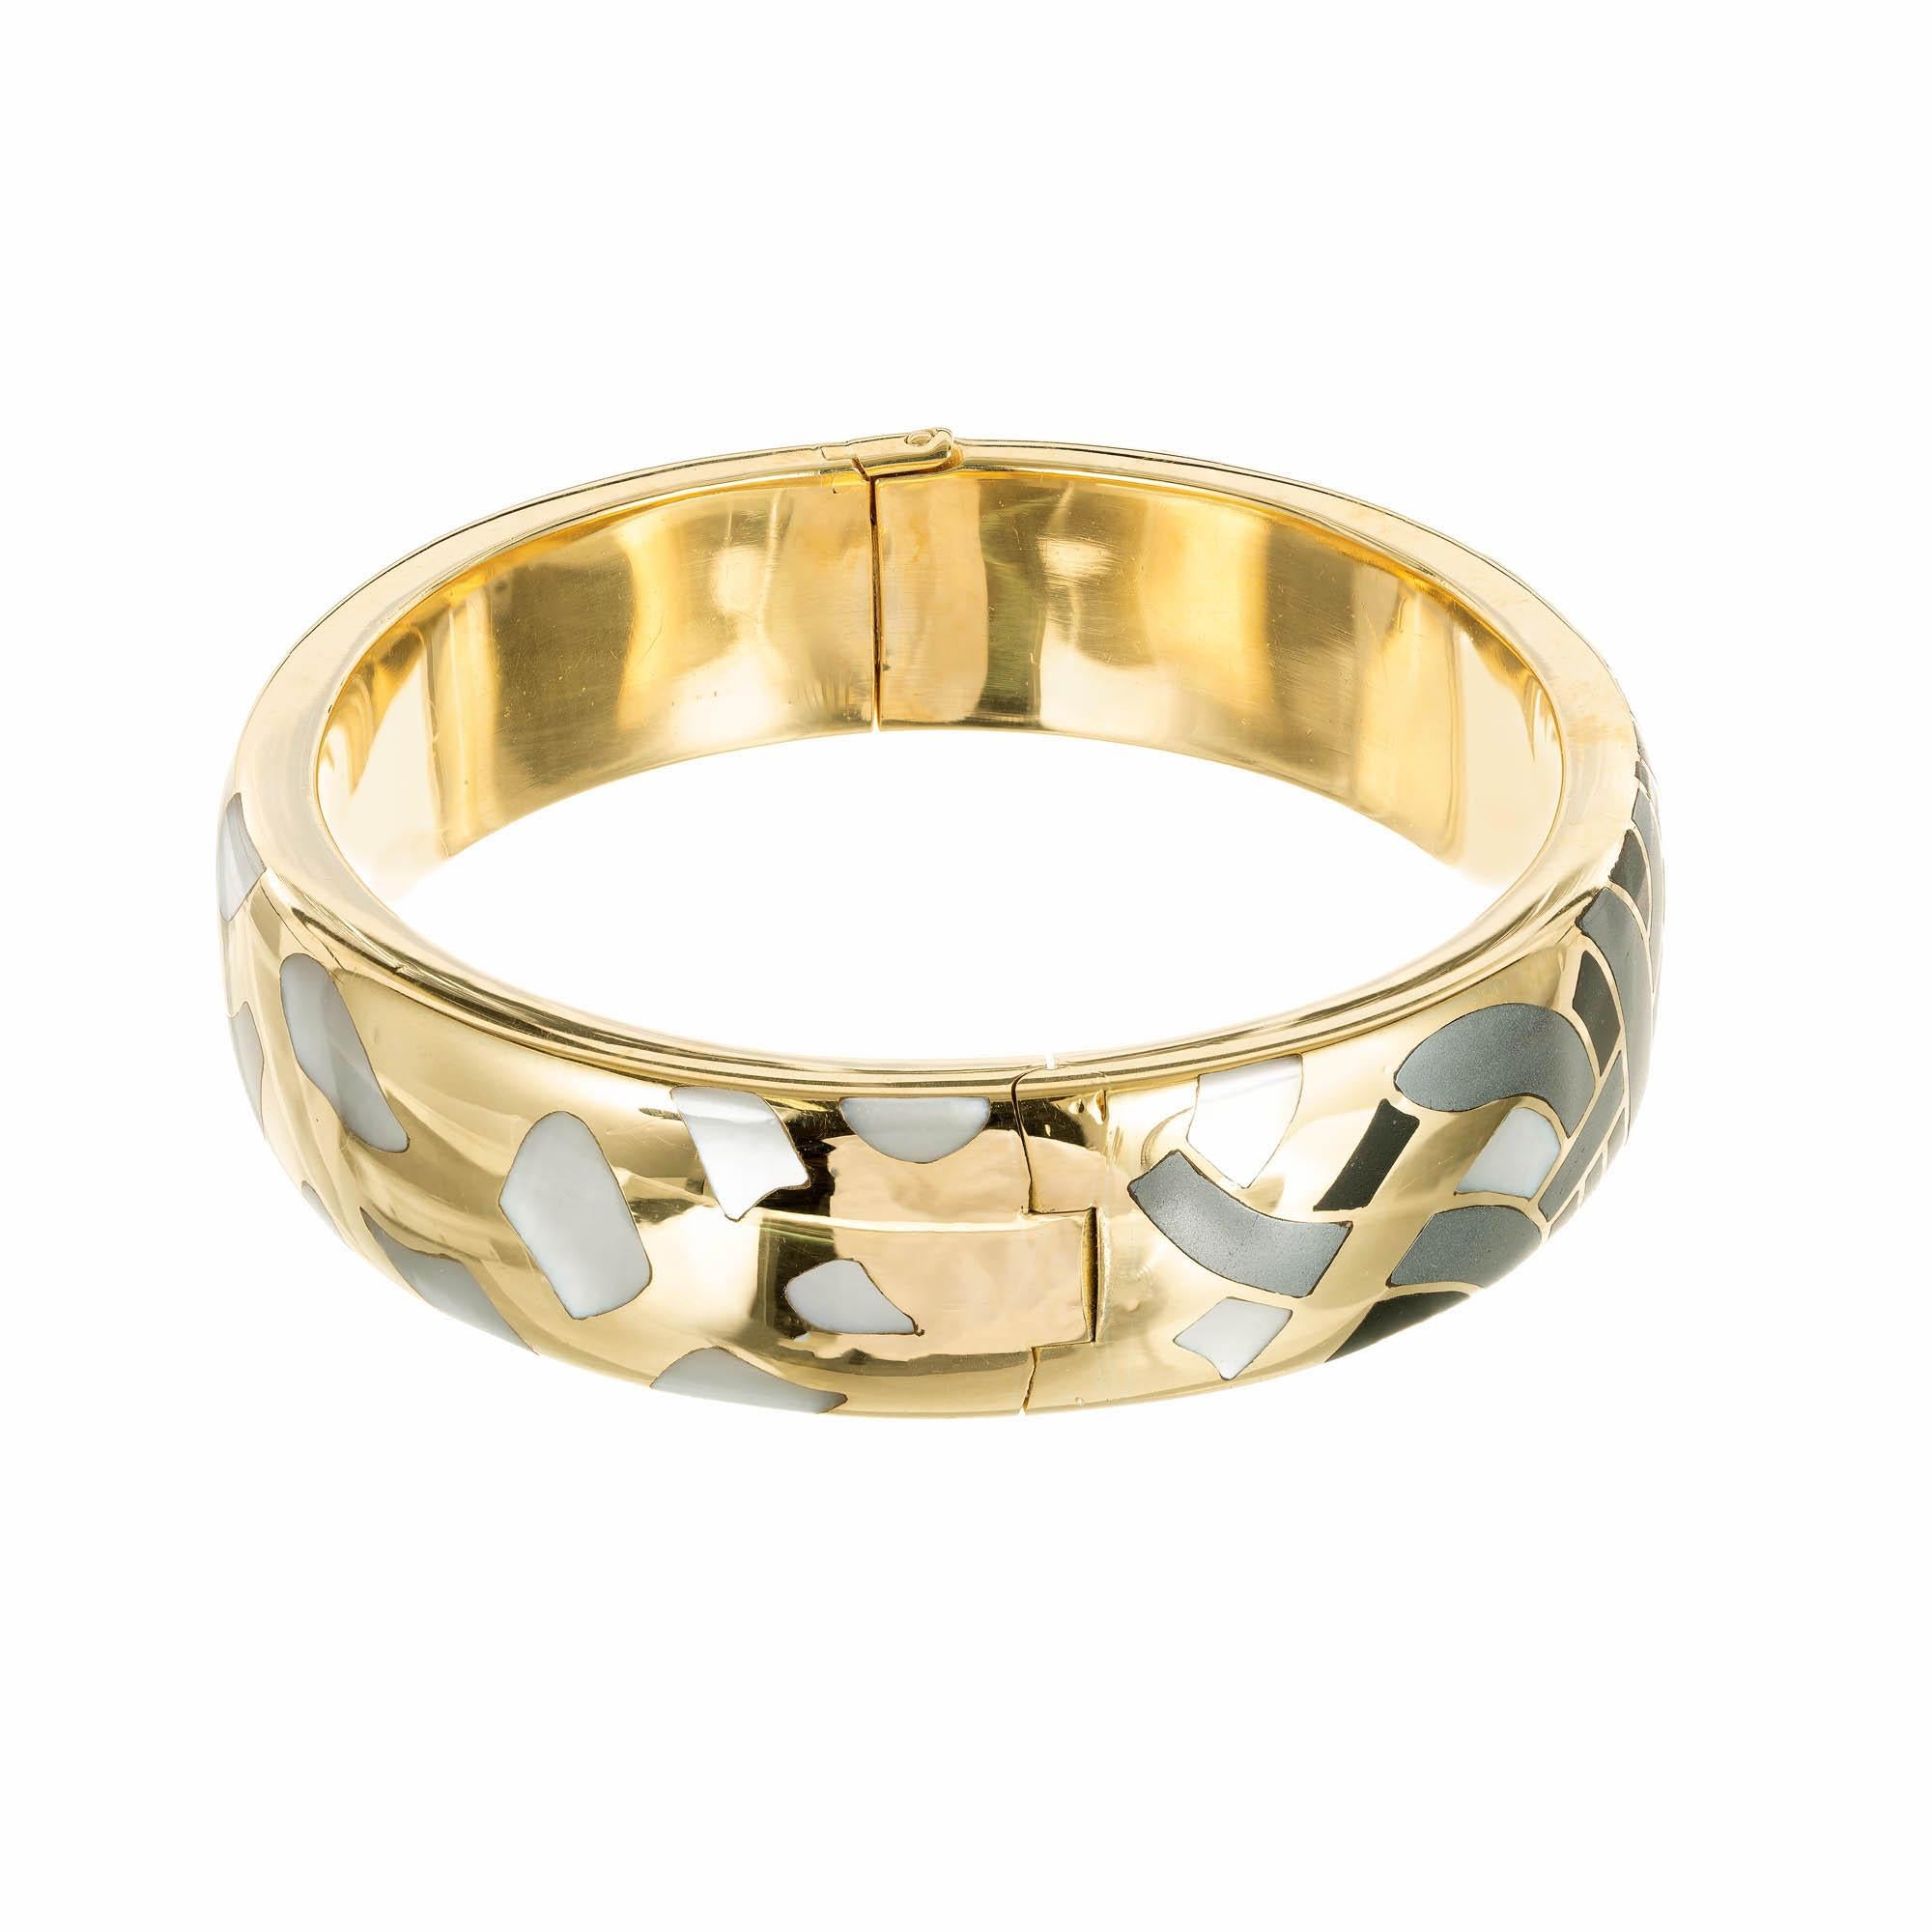 Tiffany & Co Inlaid hinged bangle bracelet, mother of pearl, hematite and black jade in 18k yellow gold. Secure catch and side lock safety. Circa 1980.

Mother of Pearl
Hematite
Black Jade 
18k Yellow Gold 
Stamped: 18KT 
Hallmark: T + Co
44